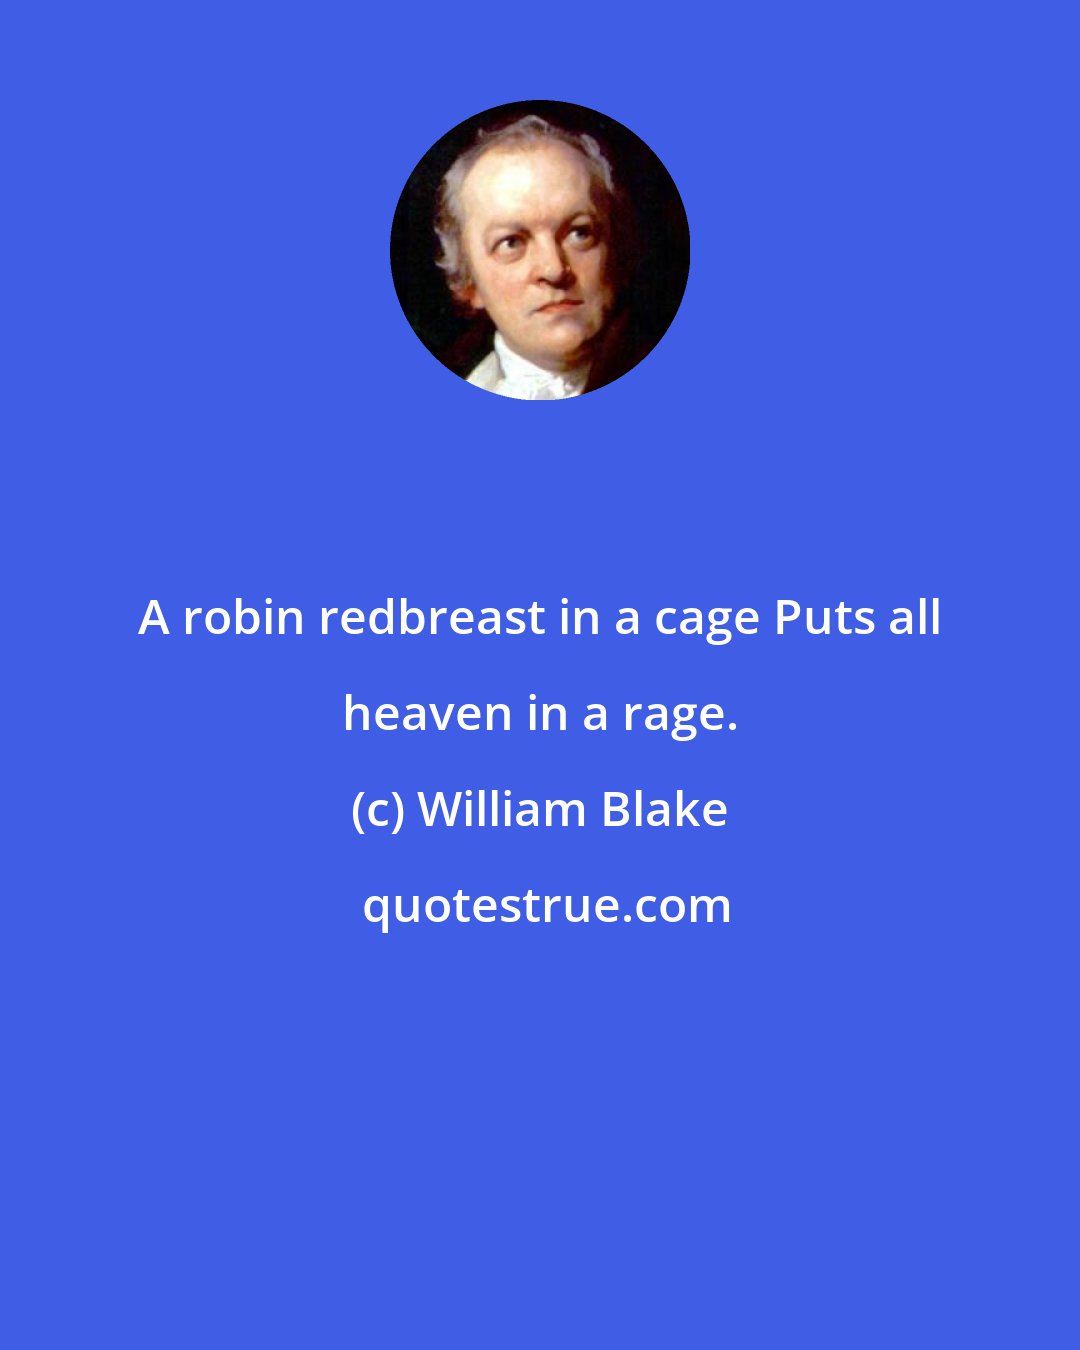 William Blake: A robin redbreast in a cage Puts all heaven in a rage.